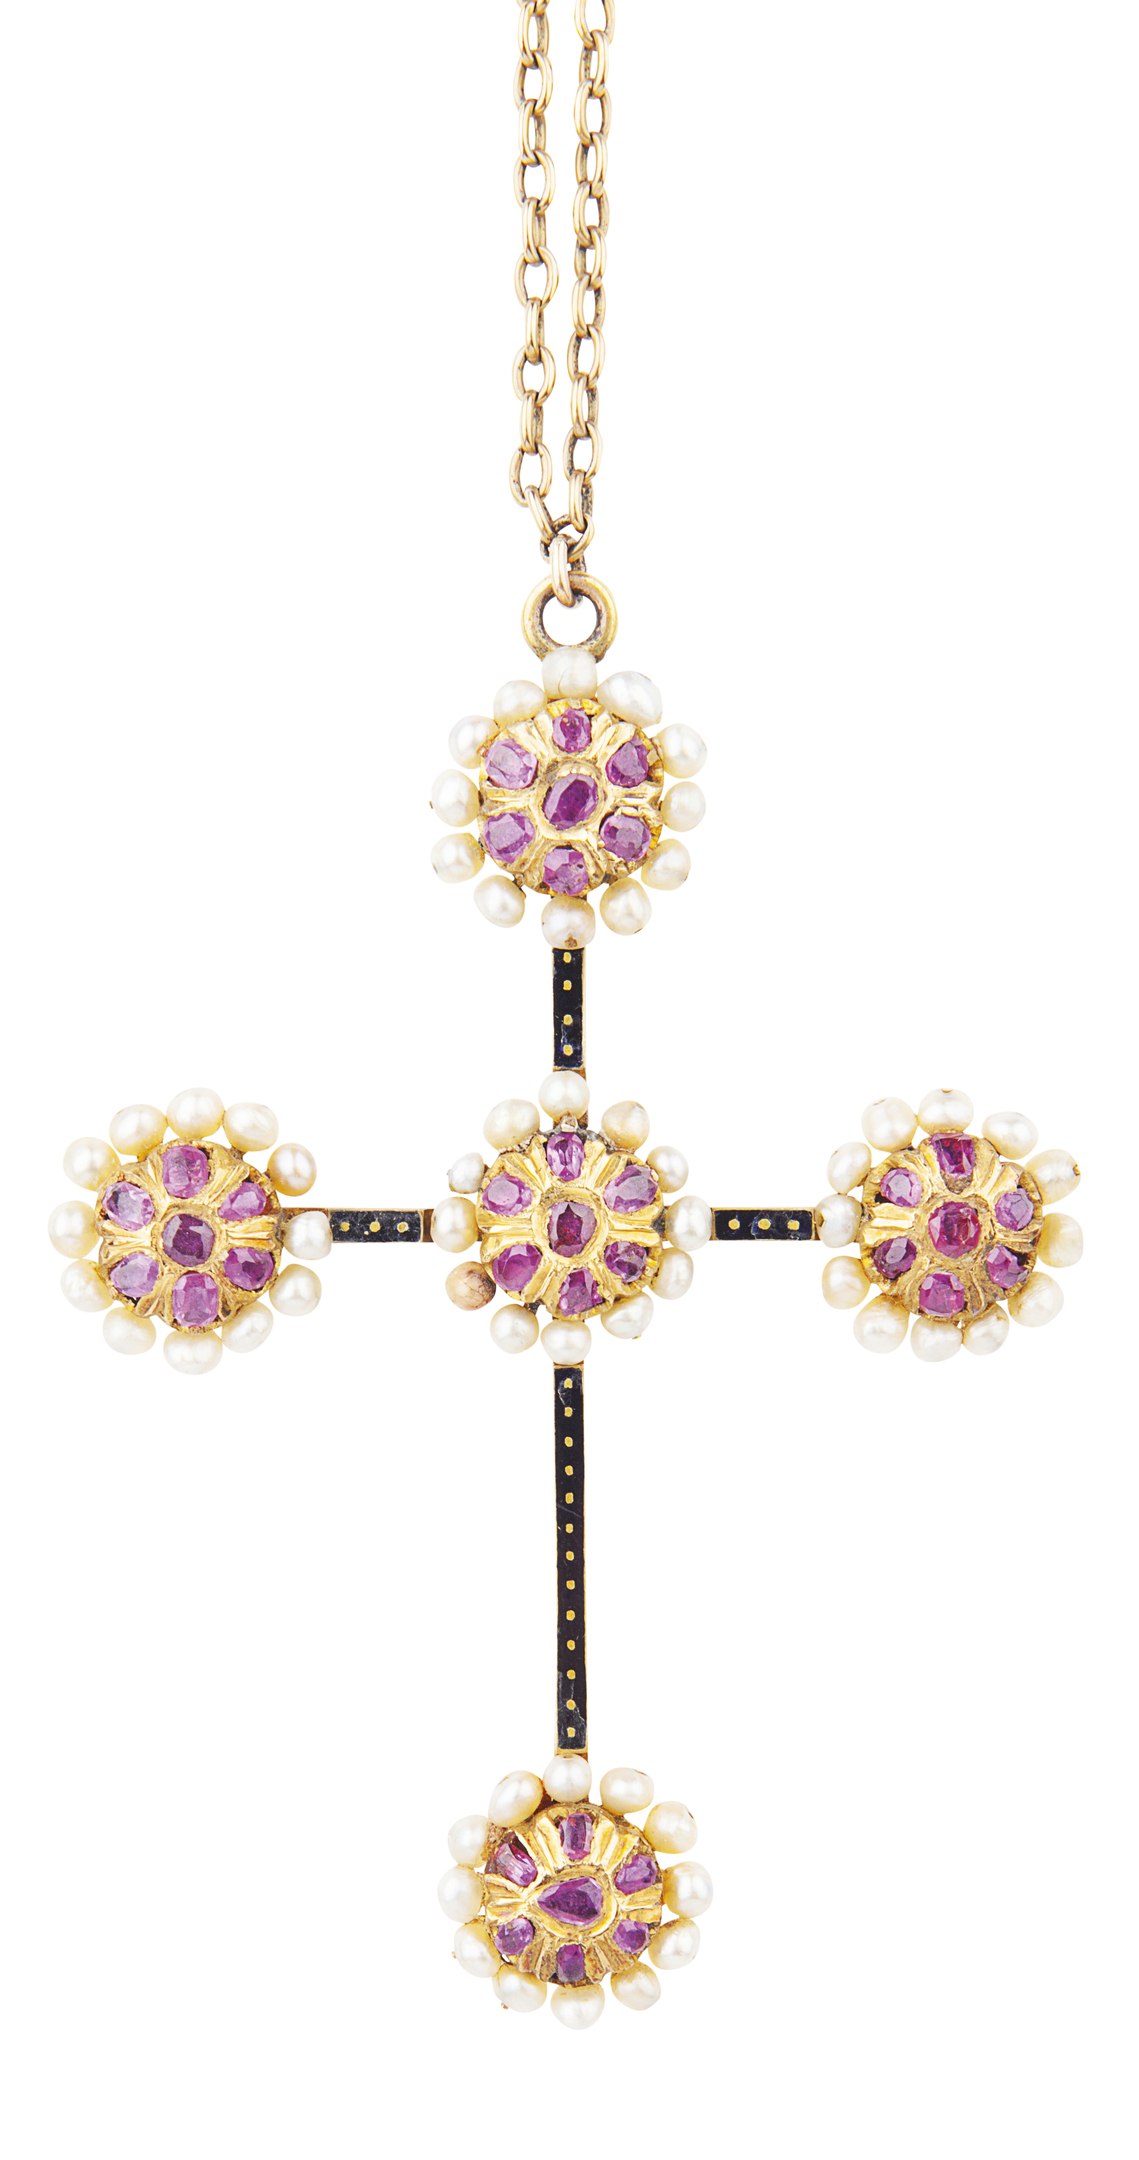 A mid-19th century Spanish ruby, pearl and enamel pendant cross